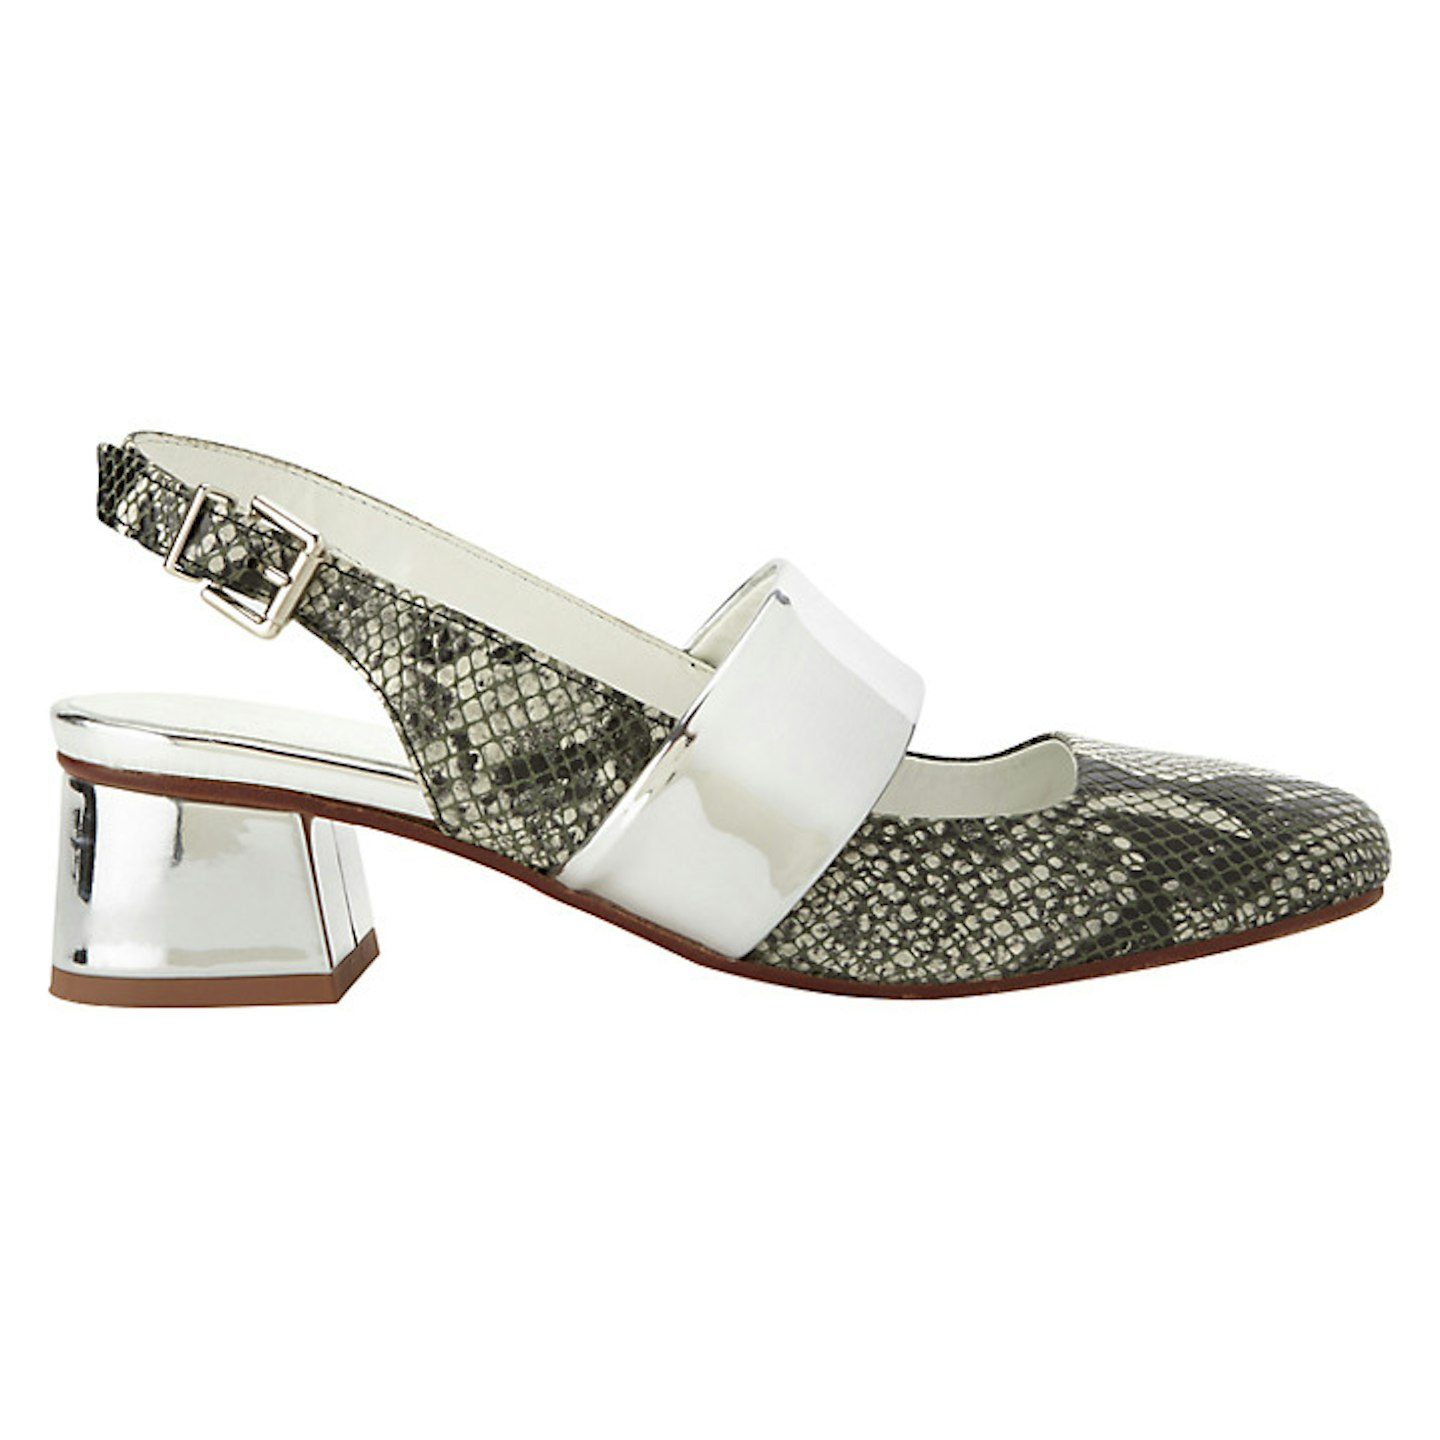 Finery Ferncroft Sling Back Closed Toe Sandals, Pewter £95